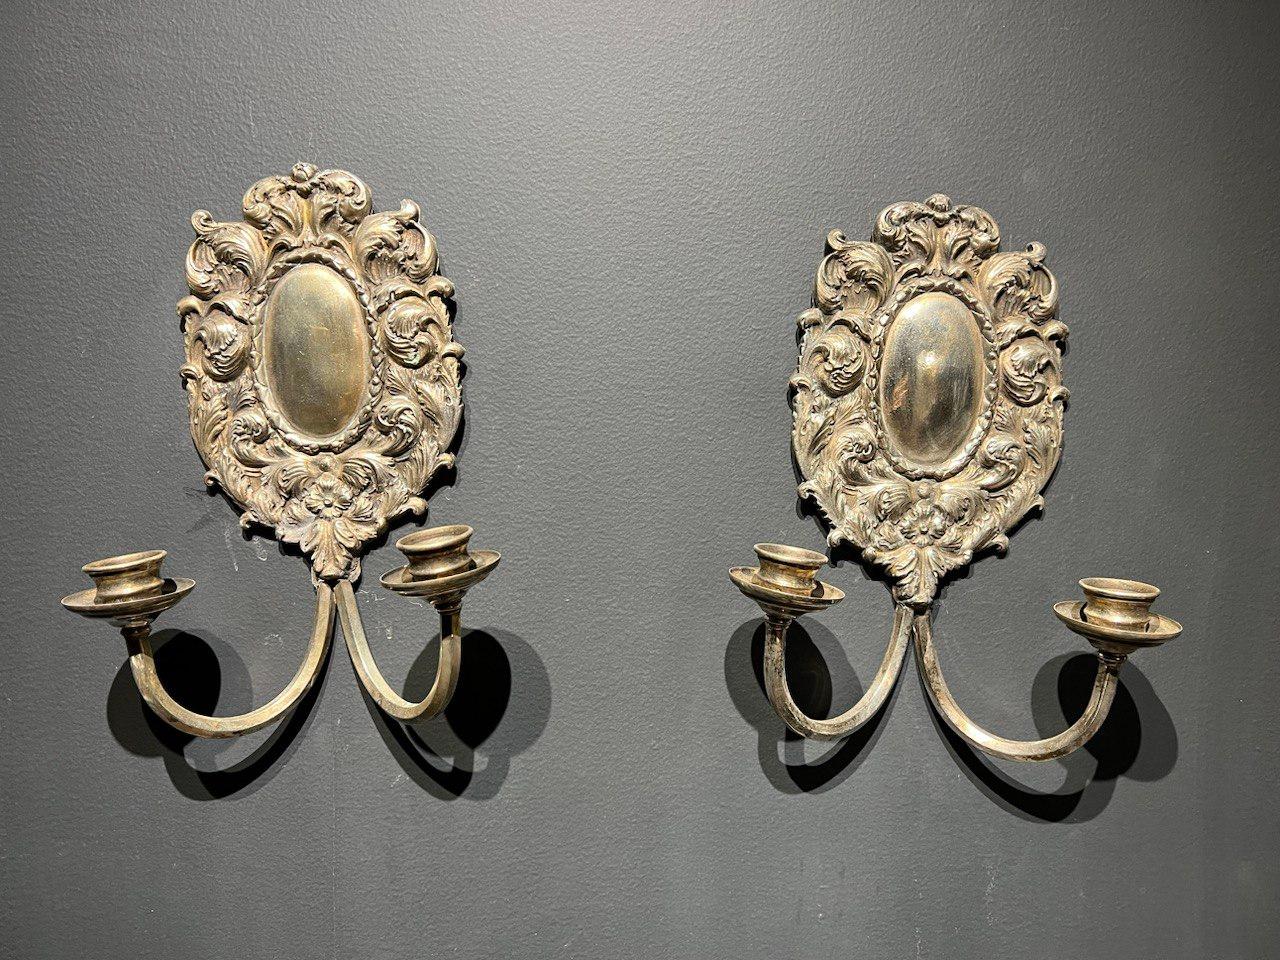 1920's Caldwell Silver Plated Sconces with Waves design In Good Condition For Sale In New York, NY